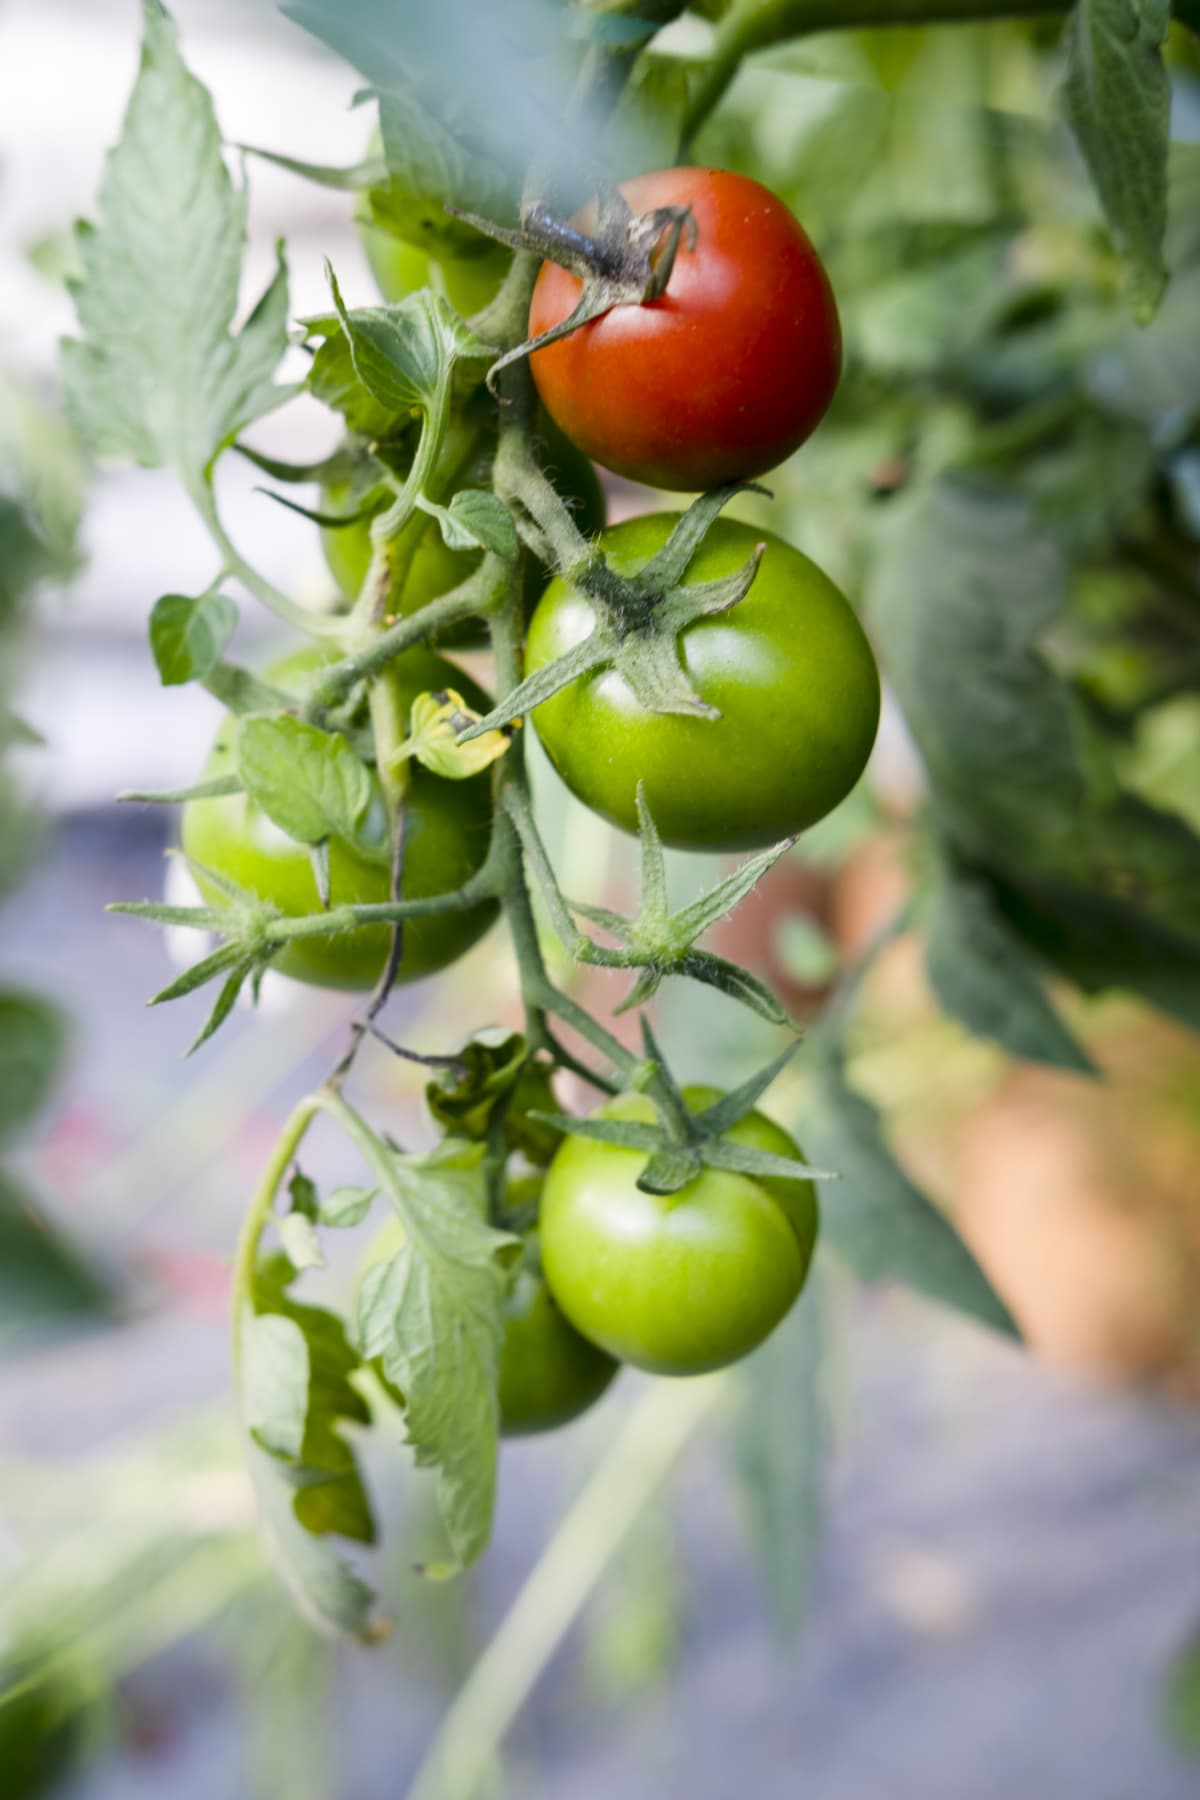 Red and green tomatoes growing on a vine in a tomato garden